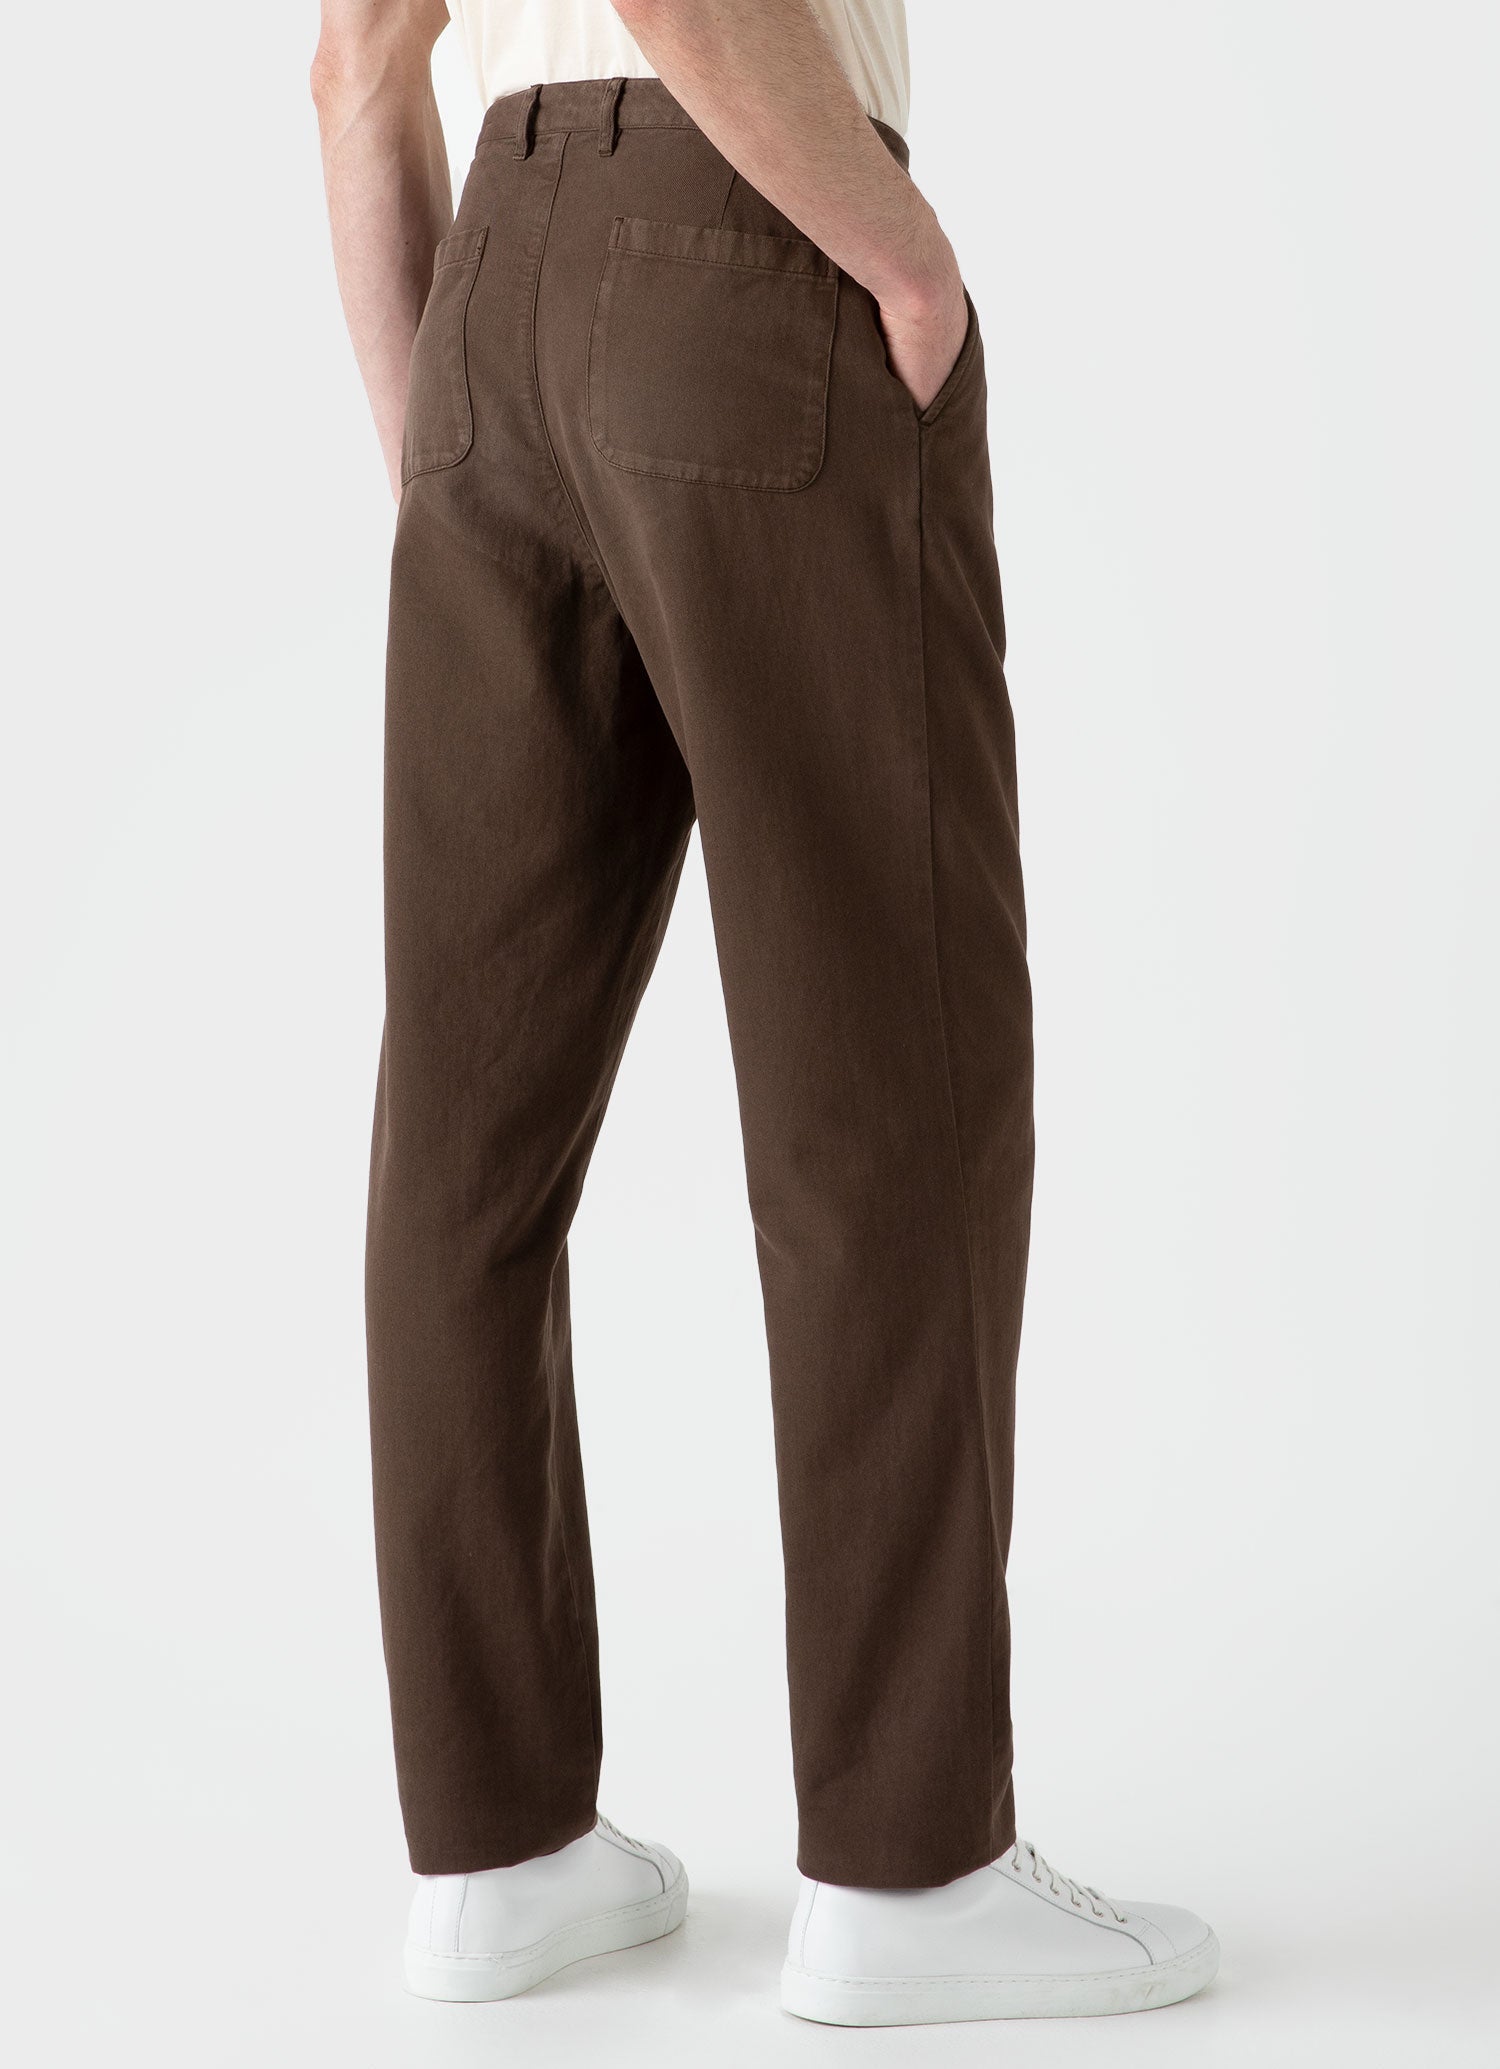 Men's Brushed Cotton Chore Trouser in Mid Brown